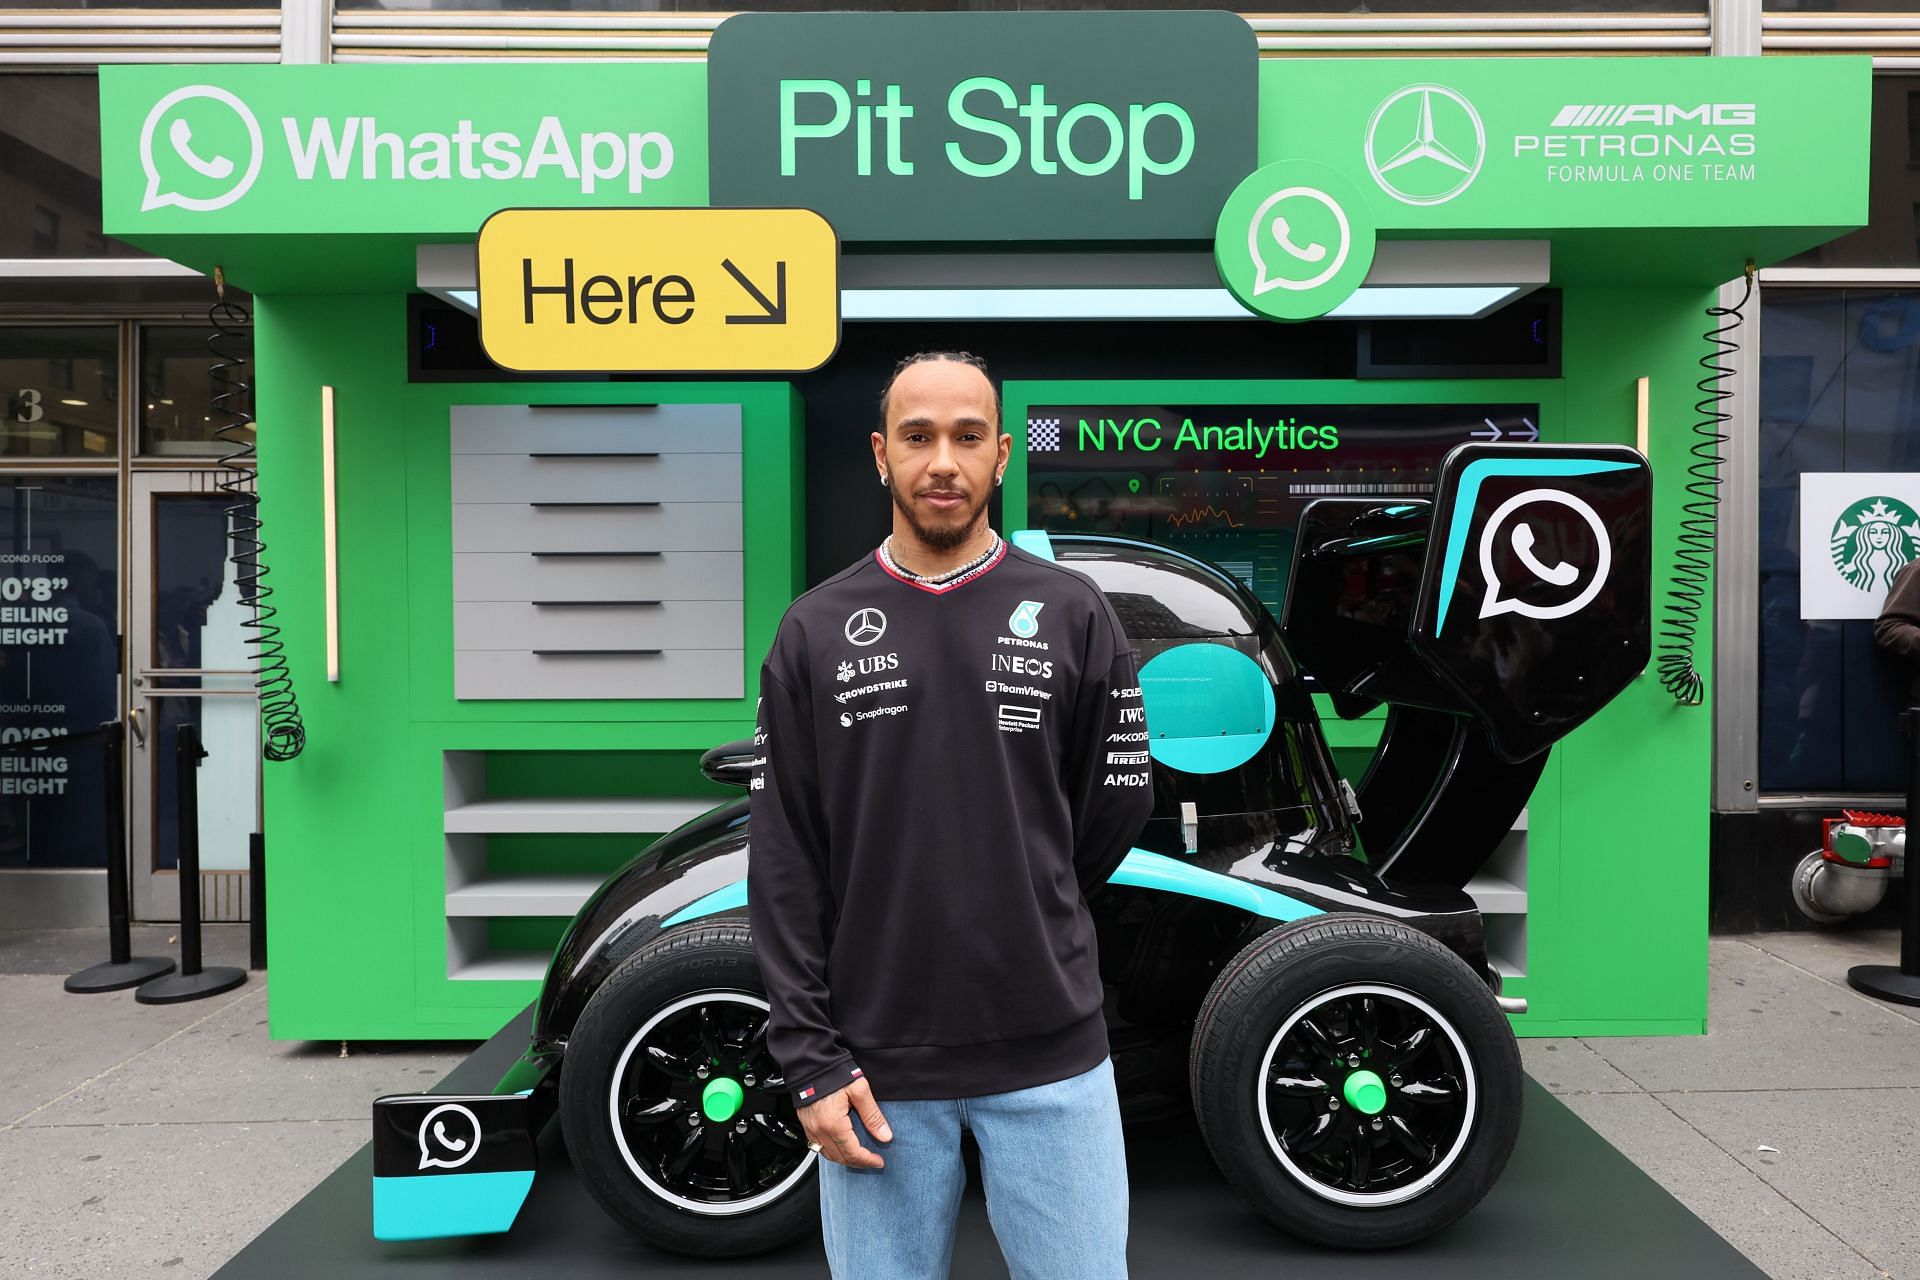 WhatsApp And The Mercedes-AMG PETRONAS F1 Team Fifth Avenue Speed Demo With Lewis Hamilton And Toto Wolff